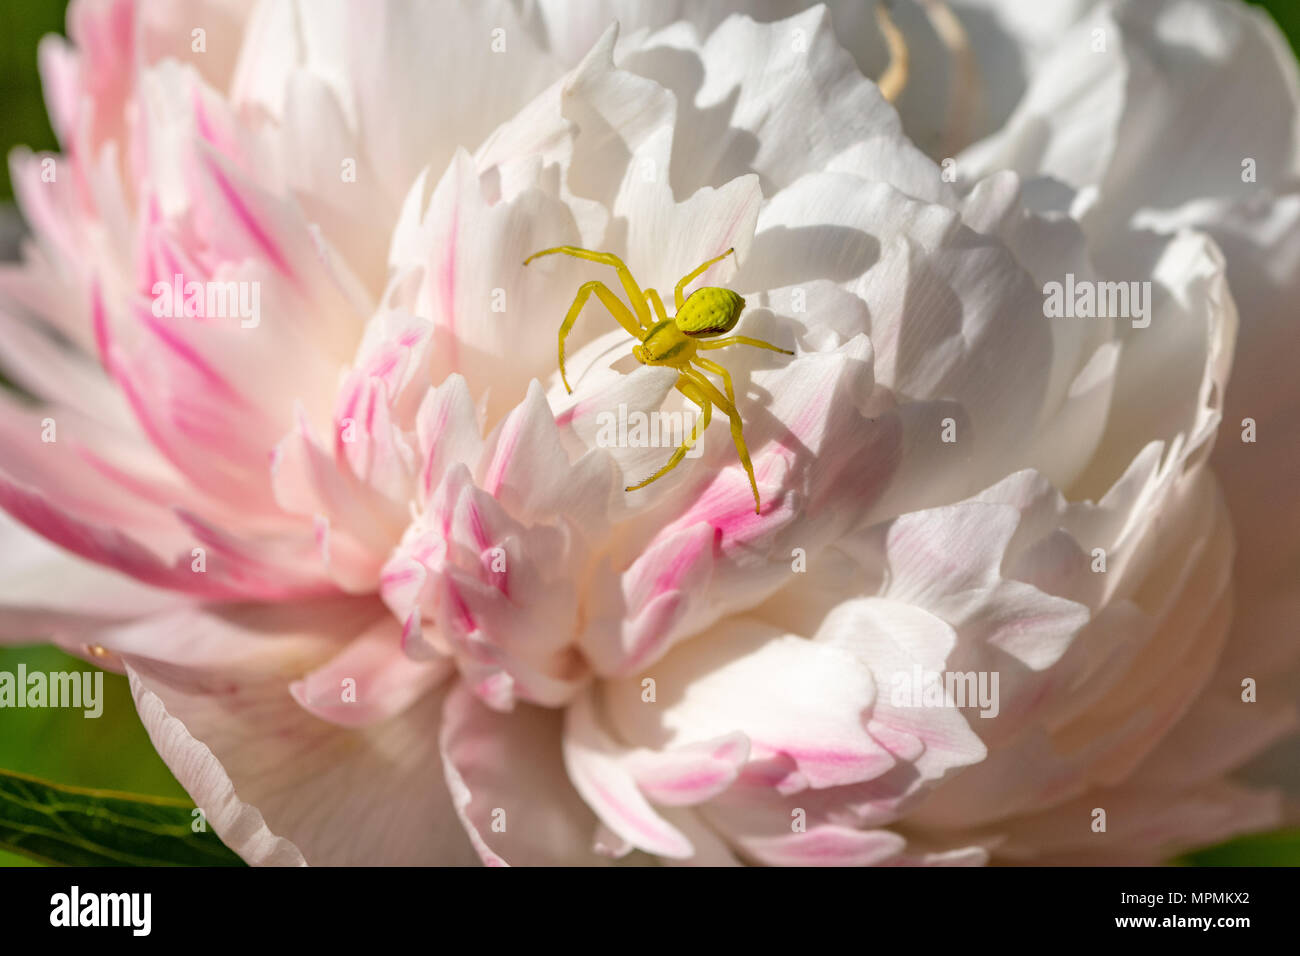 Yellow crab spider (Thomisidae genus) on a white and pink Chrysanthemum in bloom, Essex Stock Photo